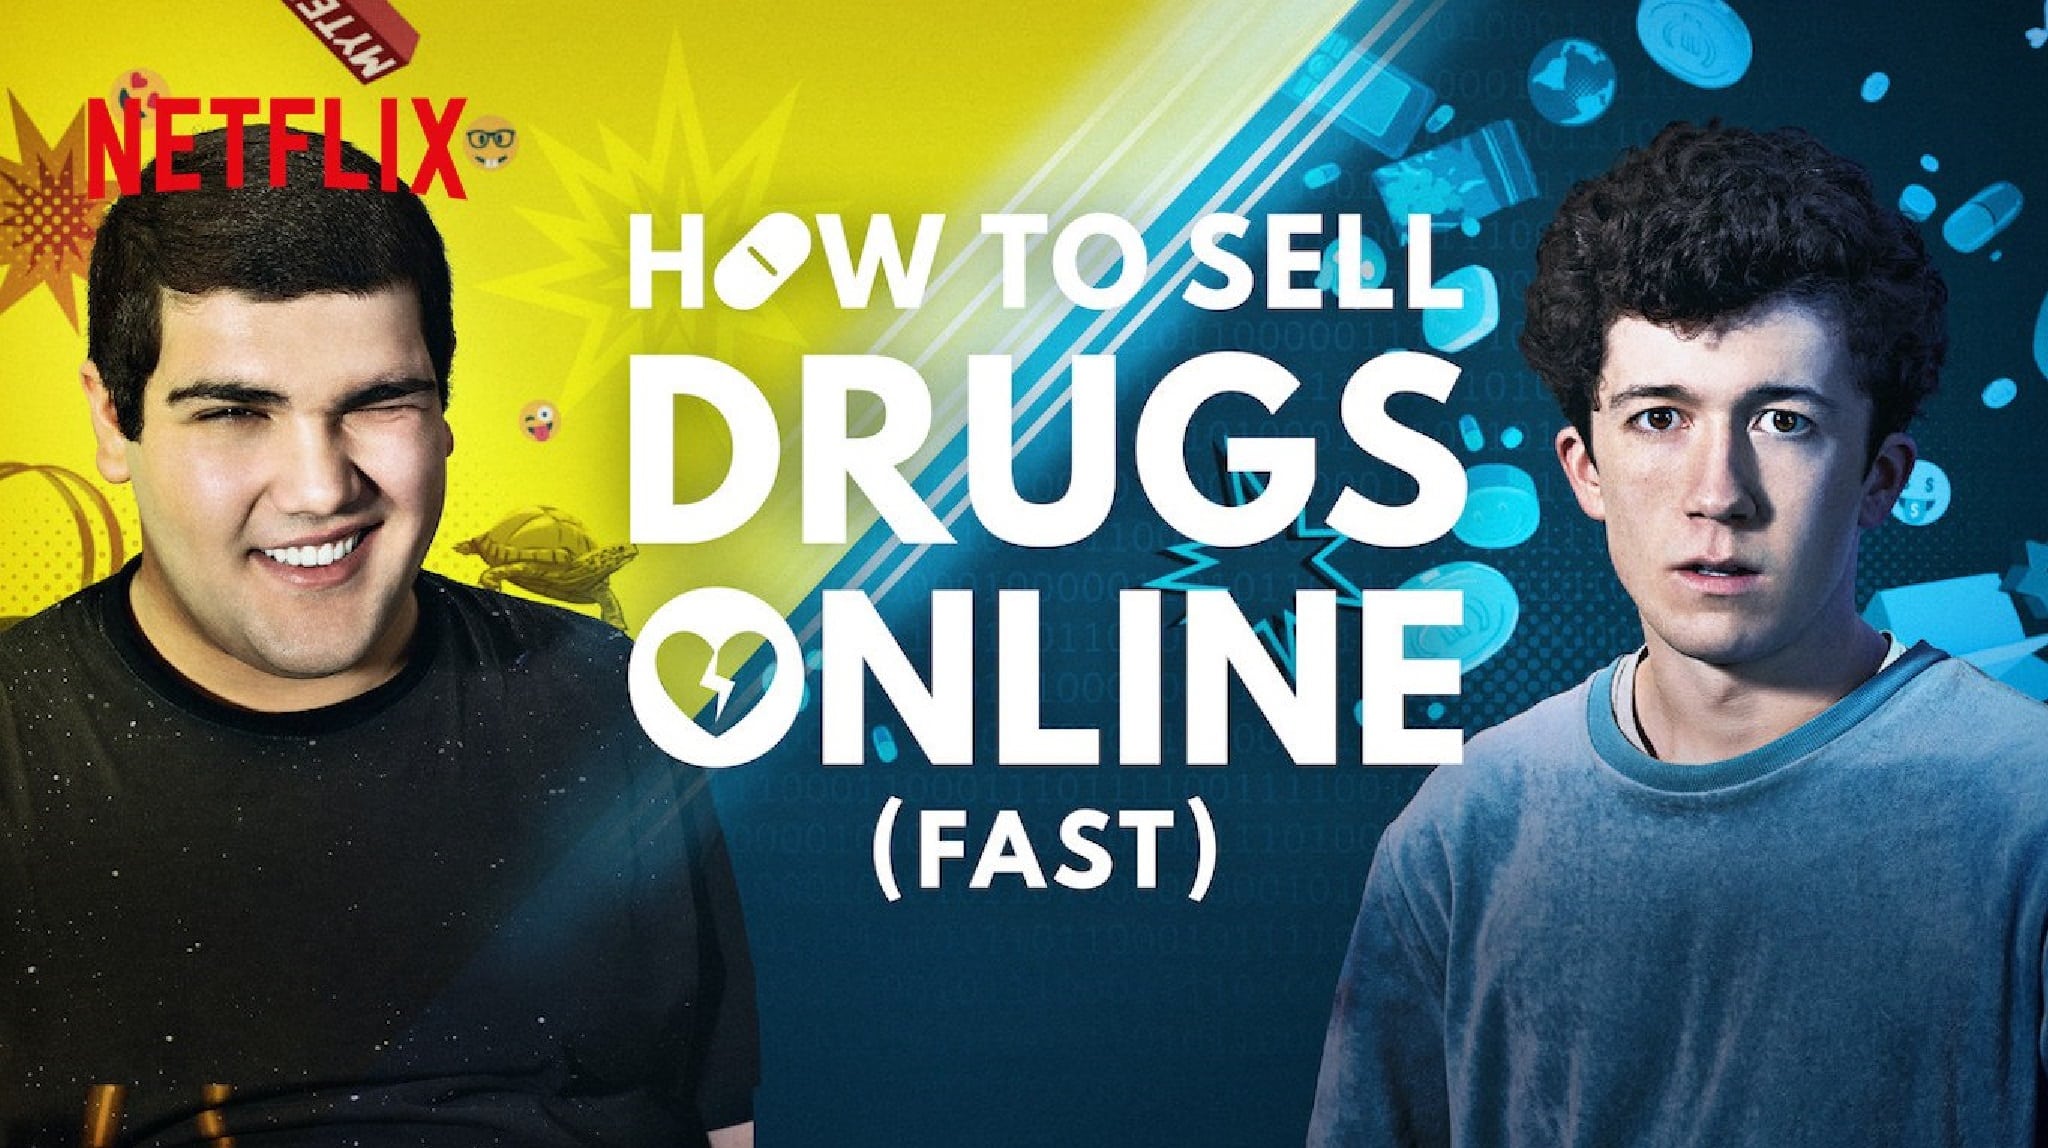 „How To Sell Drugs Online (Fast)“ – Serie auf Netflix